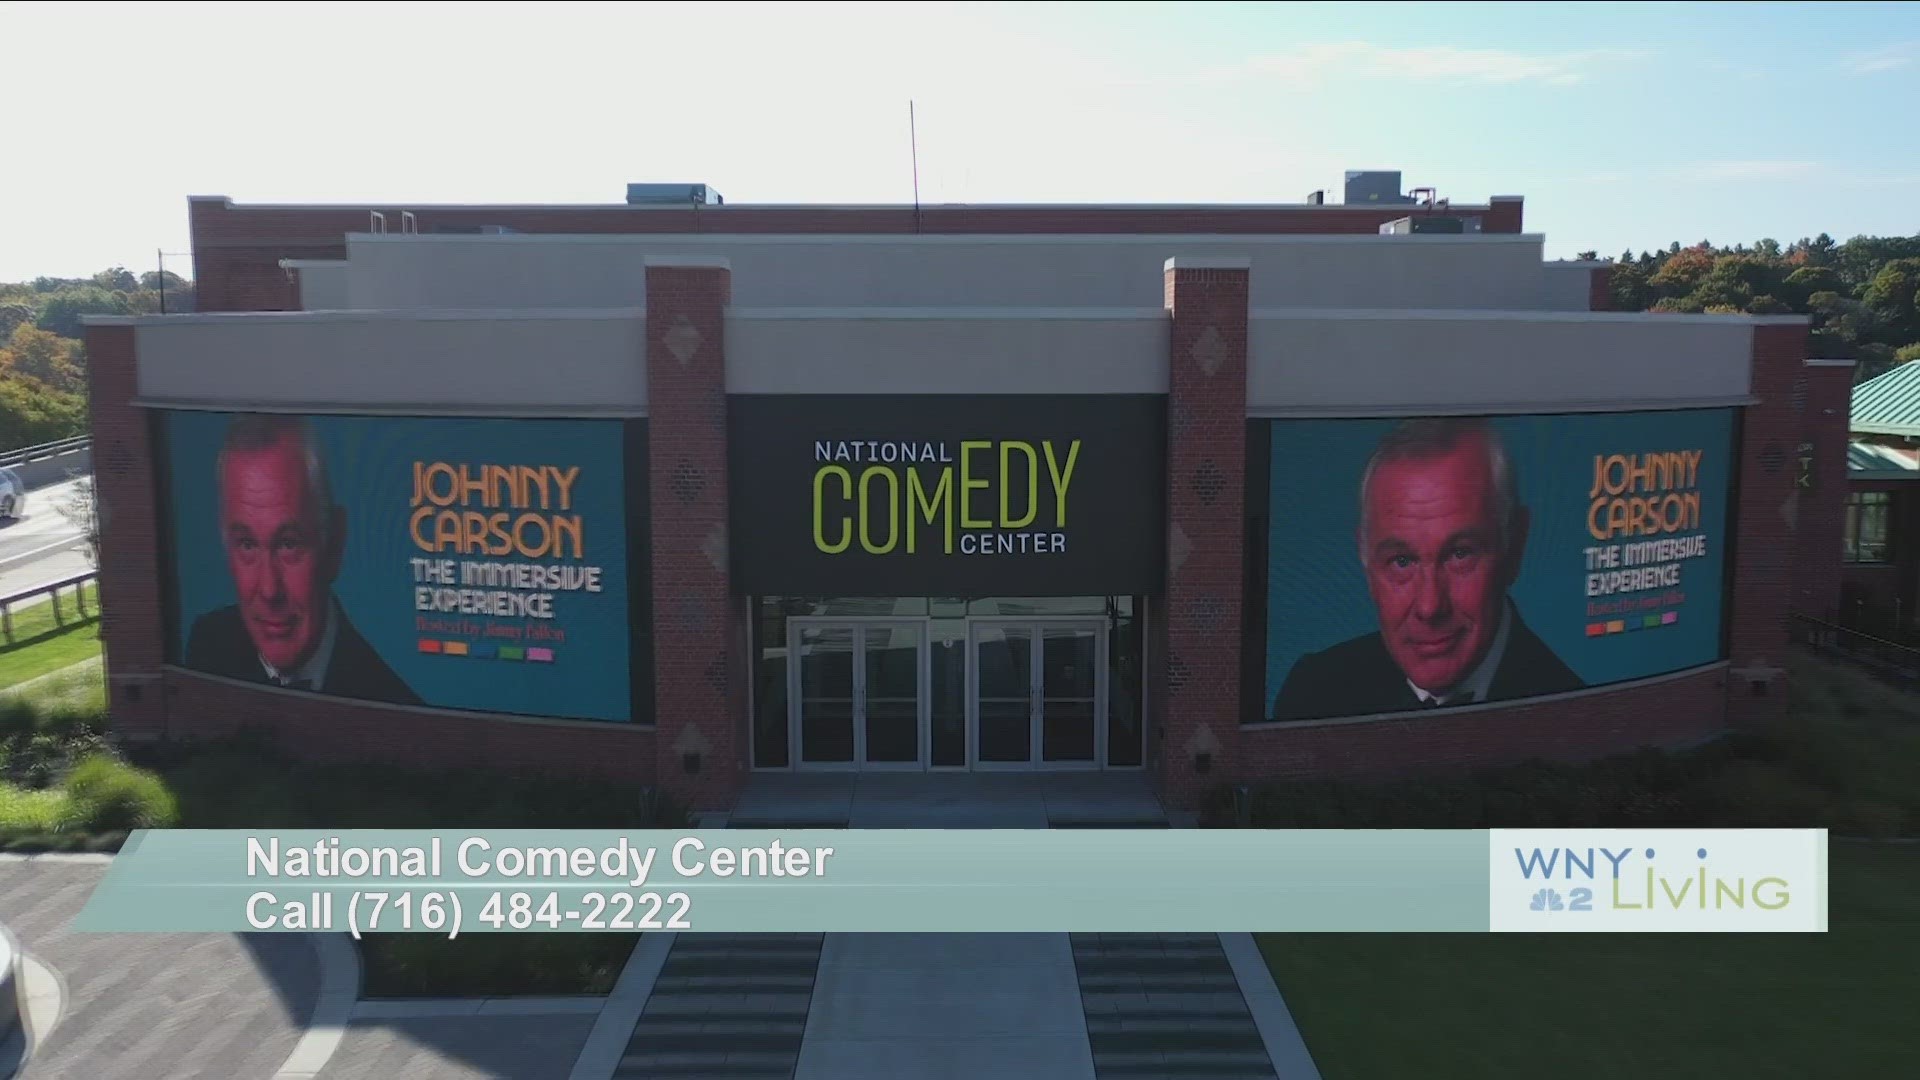 Sat. Feb. 17th - The National Comedy Center (THIS VIDEO IS SPONSORED BY THE NATIONAL COMEDY CENTER)